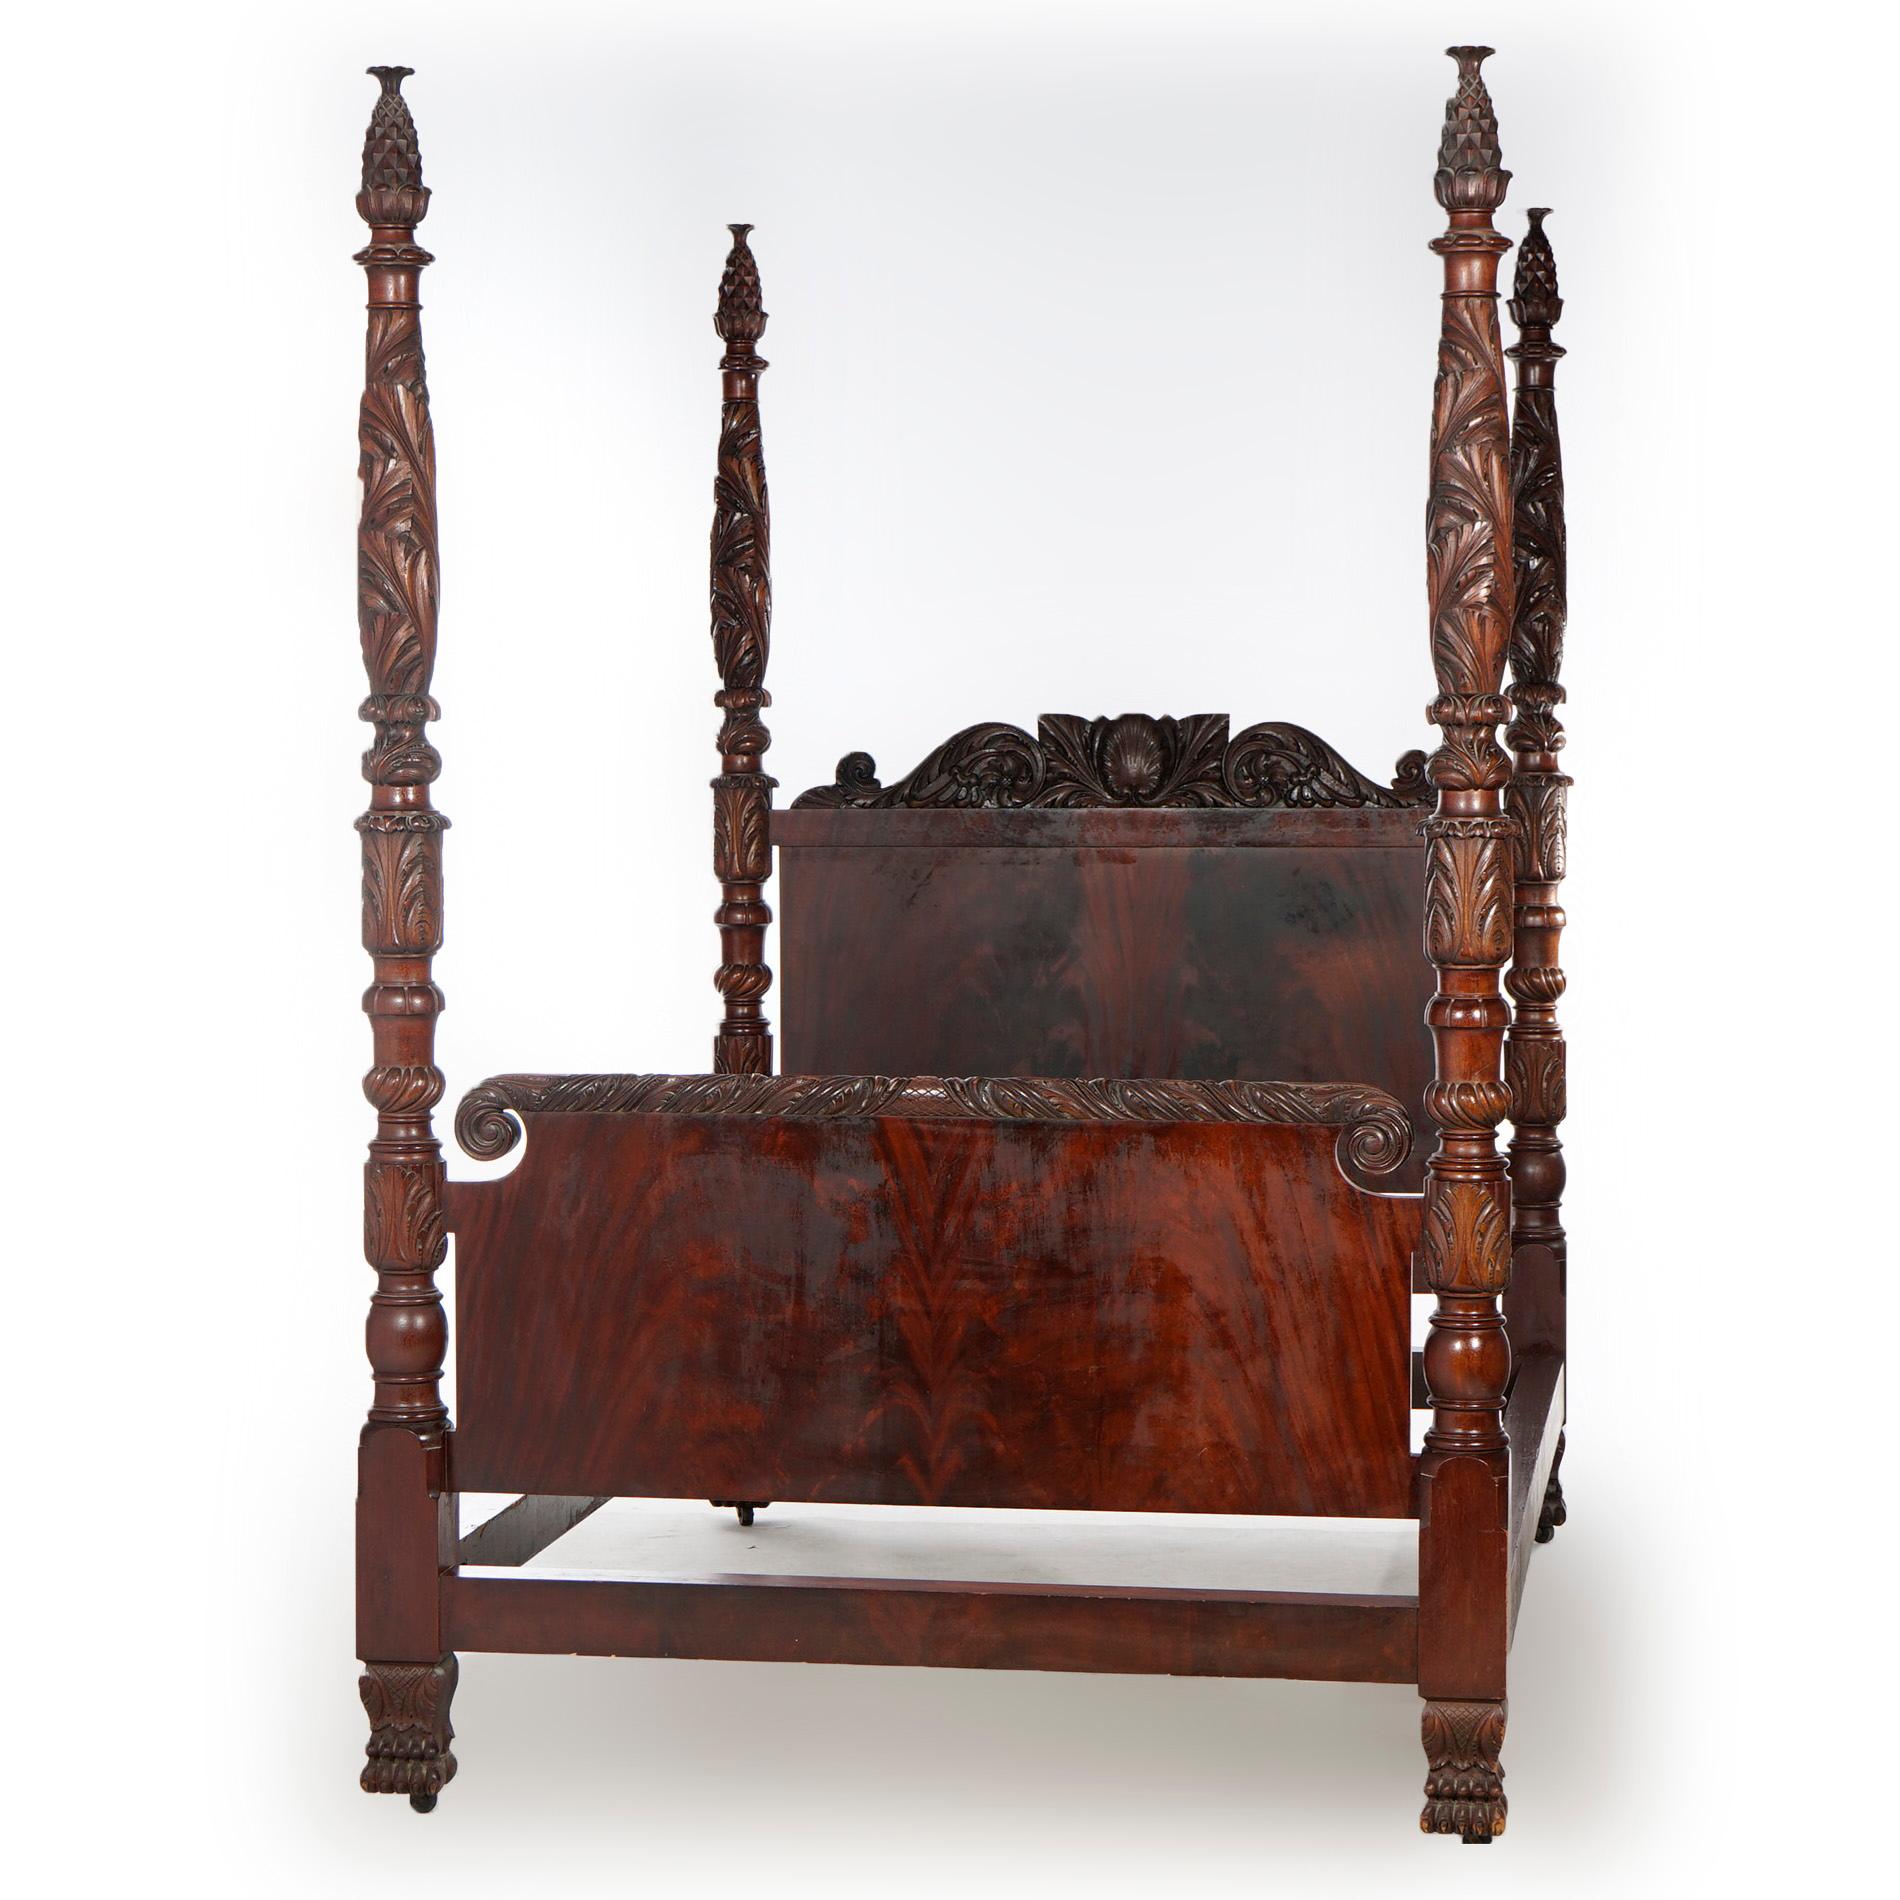 An antique American Second Empire poster double/full size bed in the manner of Berkey and Gay offers mahogany construction with deeply carved posts with foliate design, c1920

Measures- 91.25''H x 60''W x 85.5''D

*Ask about DISCOUNTED DELIVERY